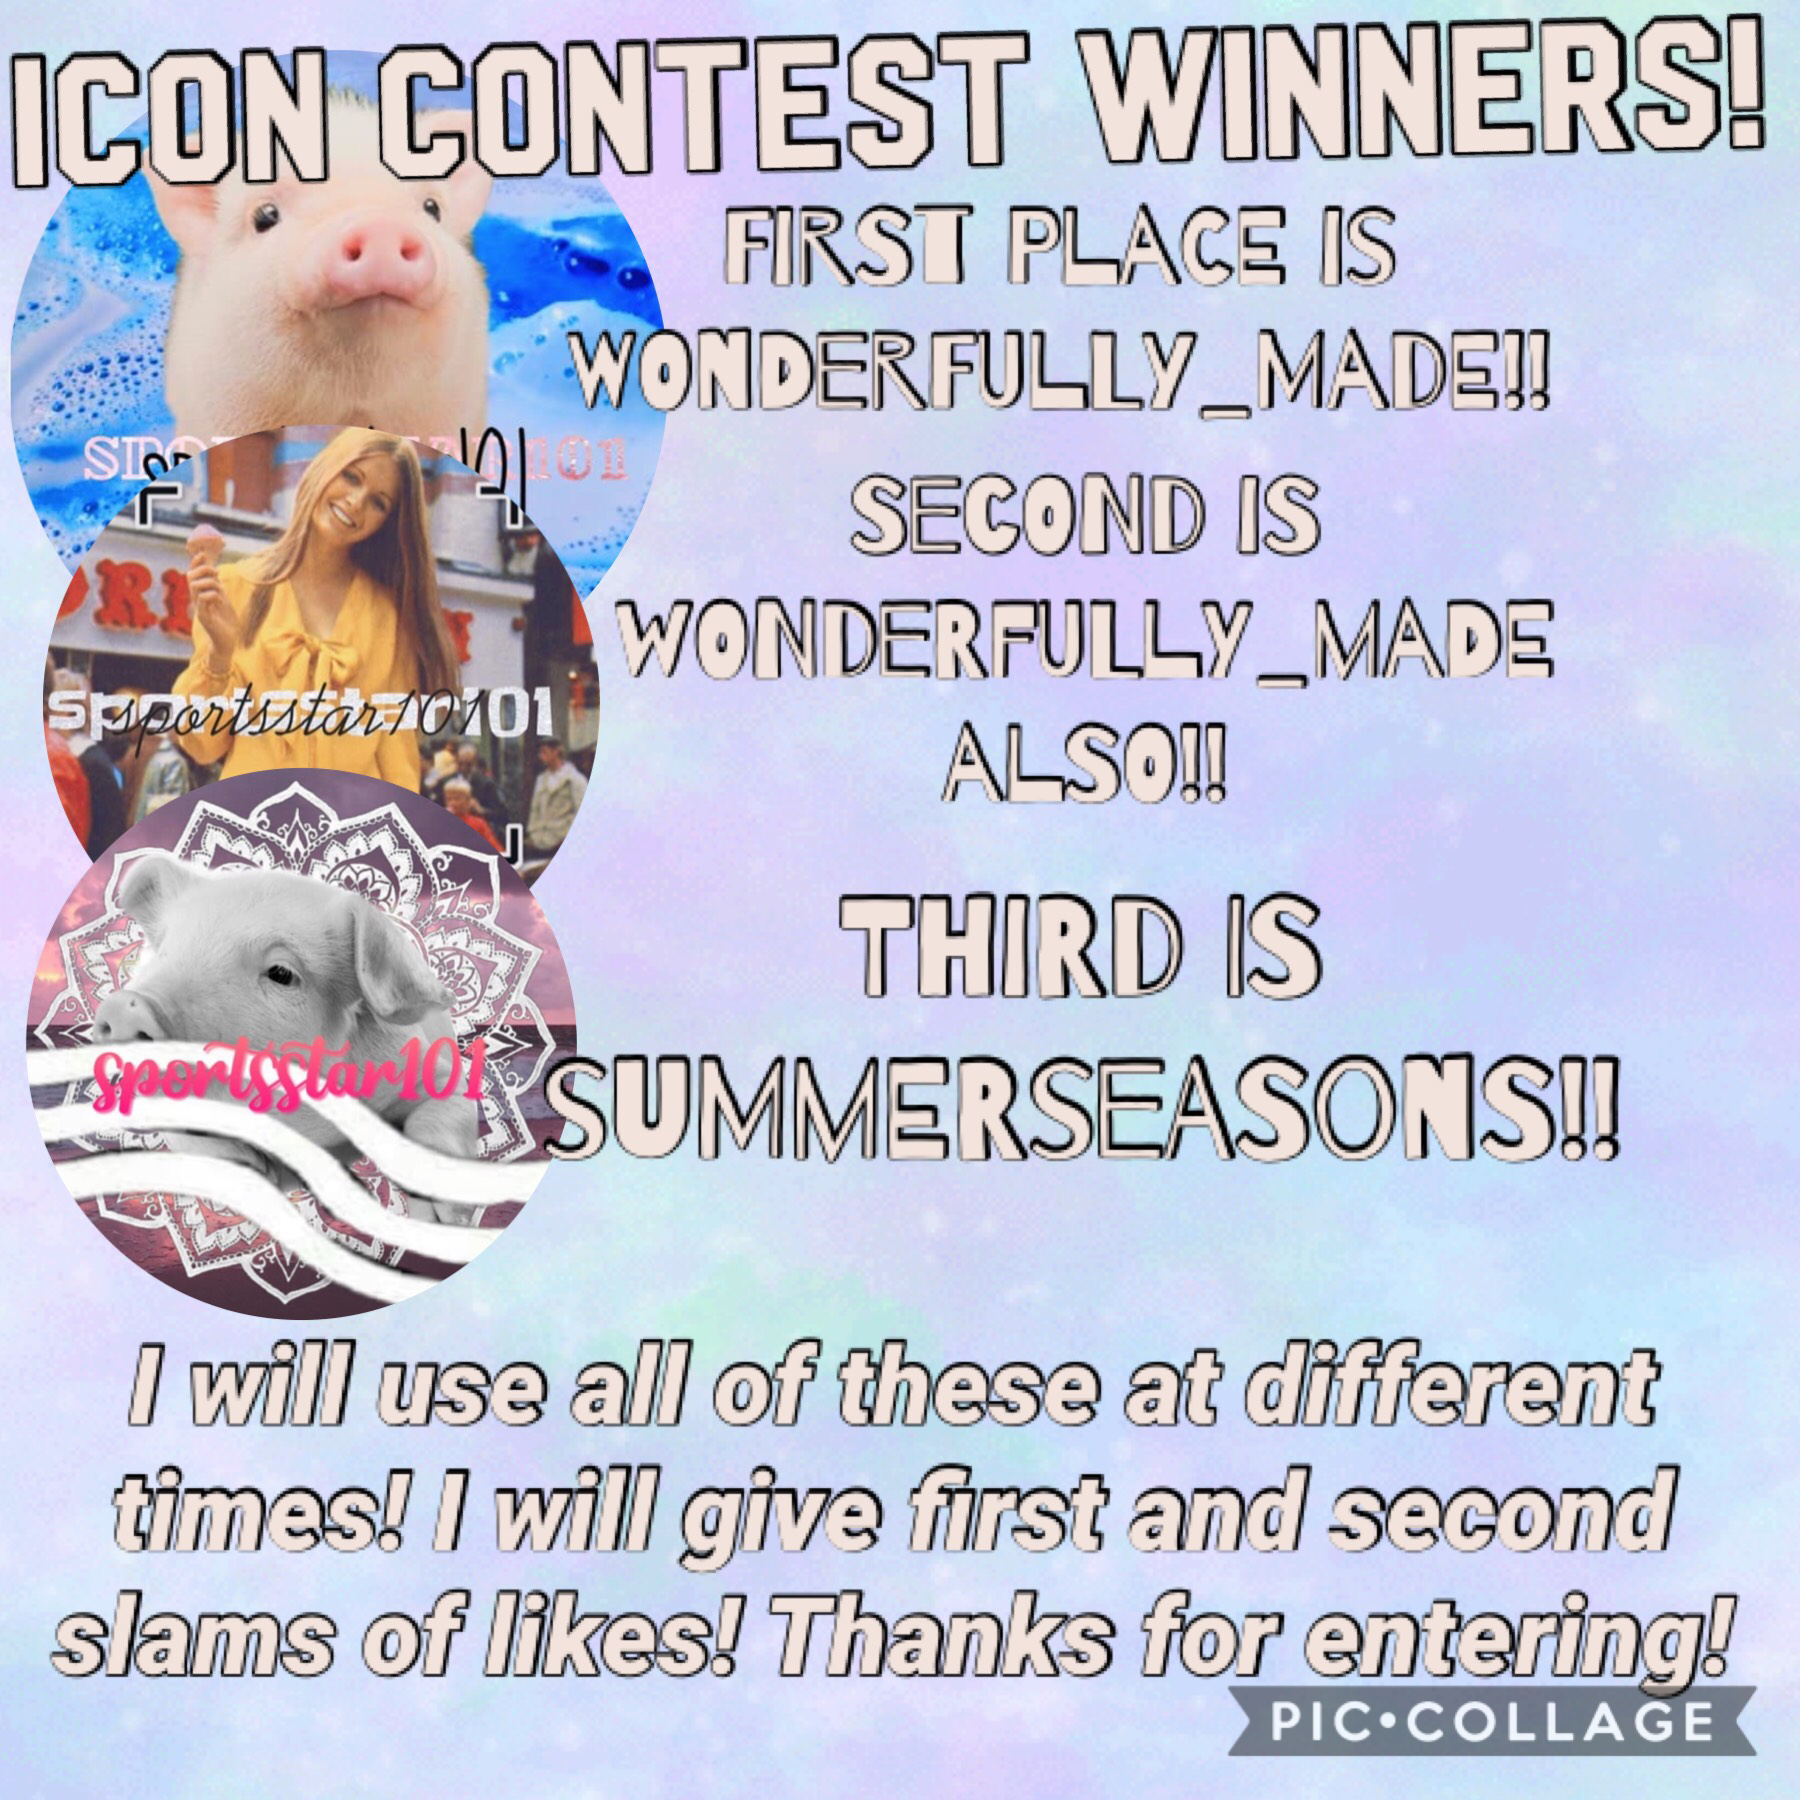 Thank you so much to all of the people who entered!